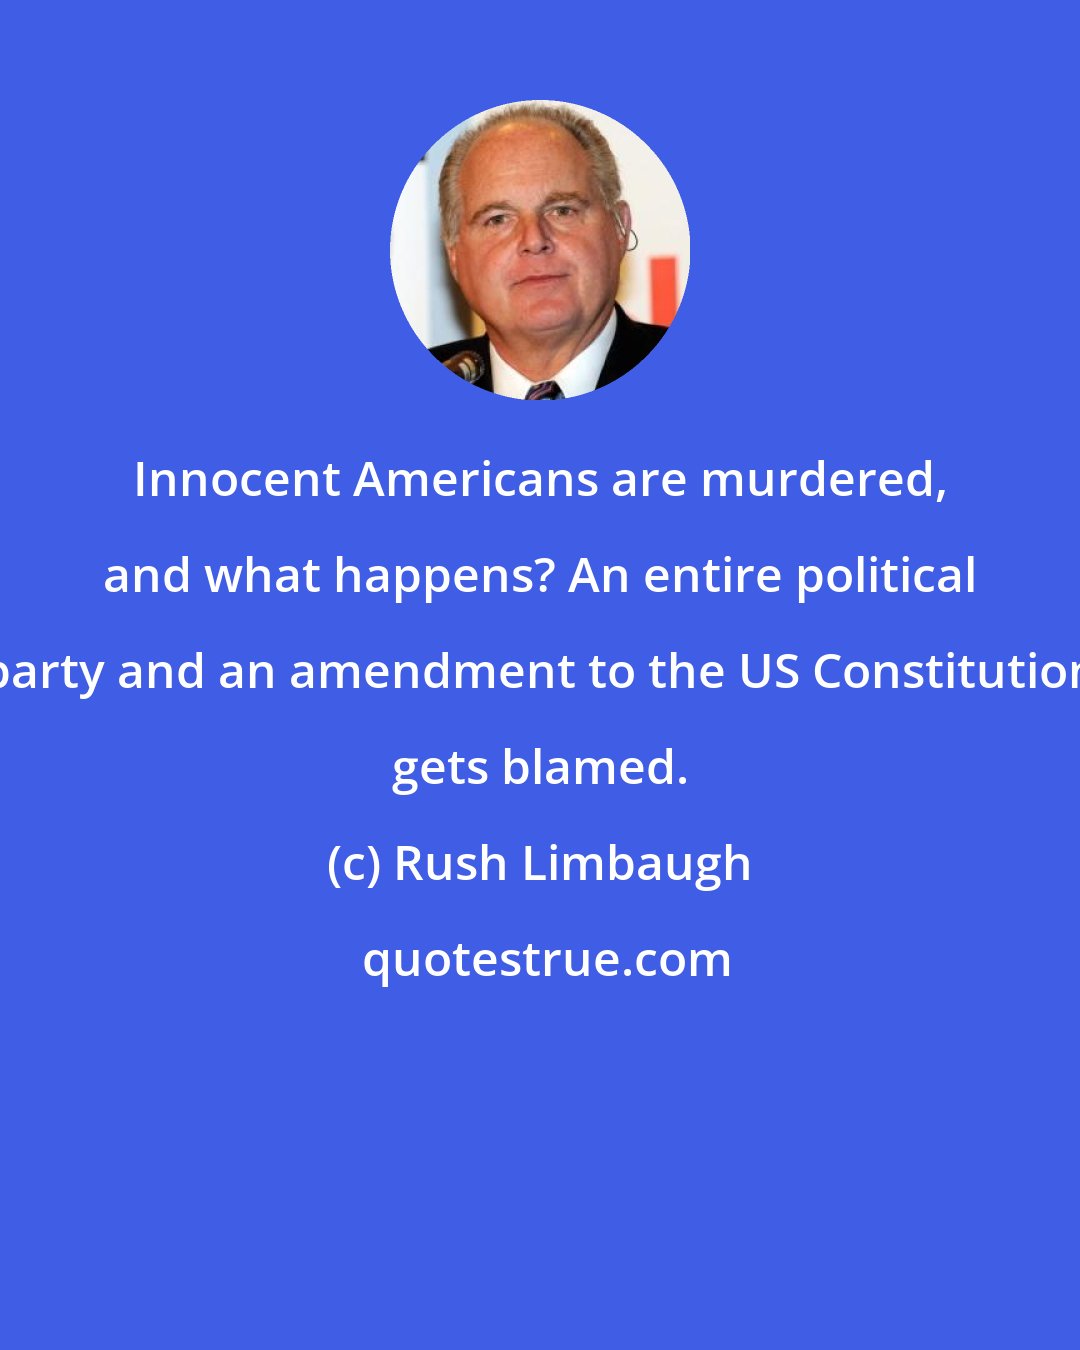 Rush Limbaugh: Innocent Americans are murdered, and what happens? An entire political party and an amendment to the US Constitution gets blamed.